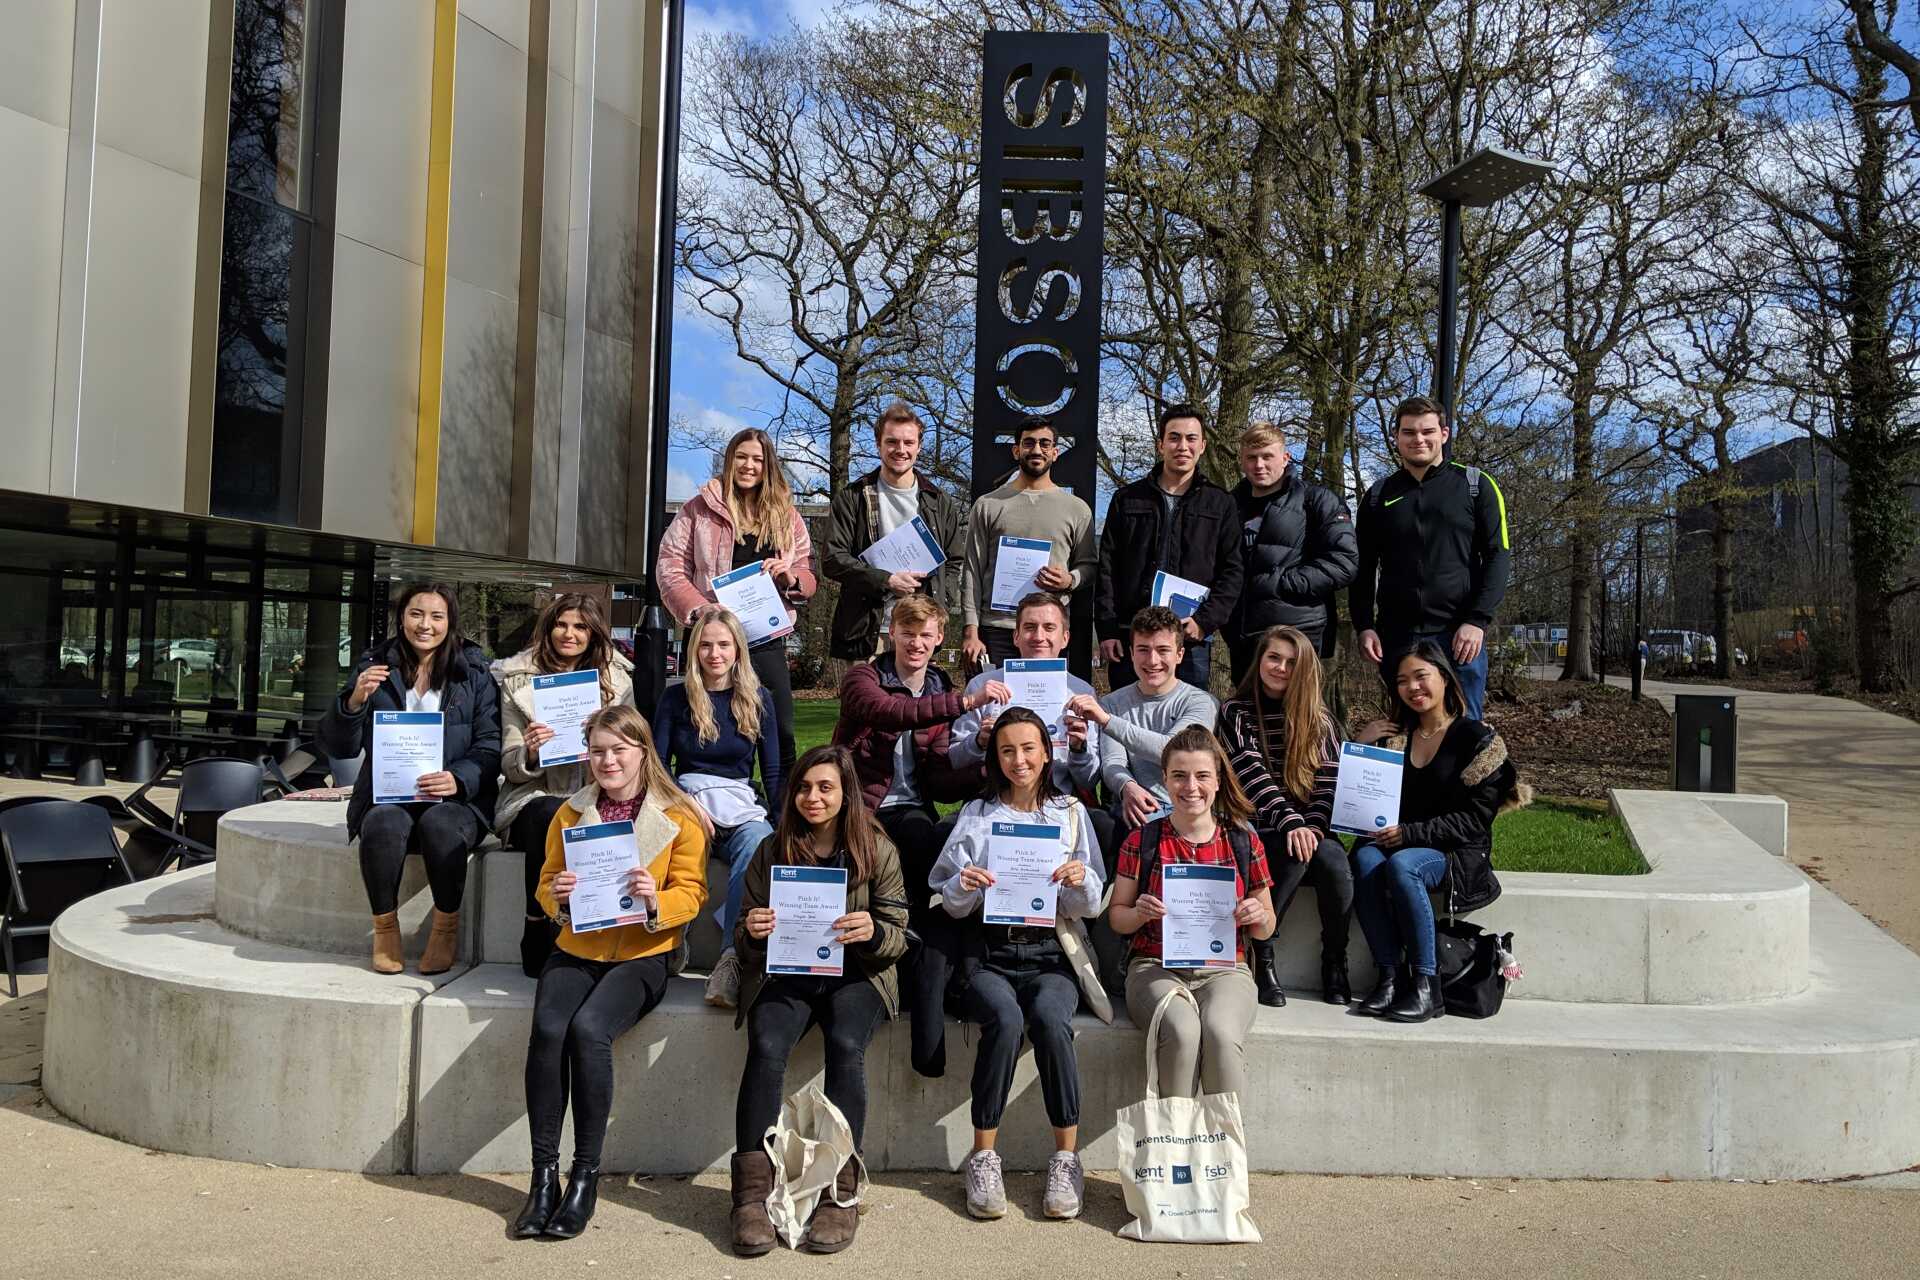 KBS students posing with certificates outside Sibson